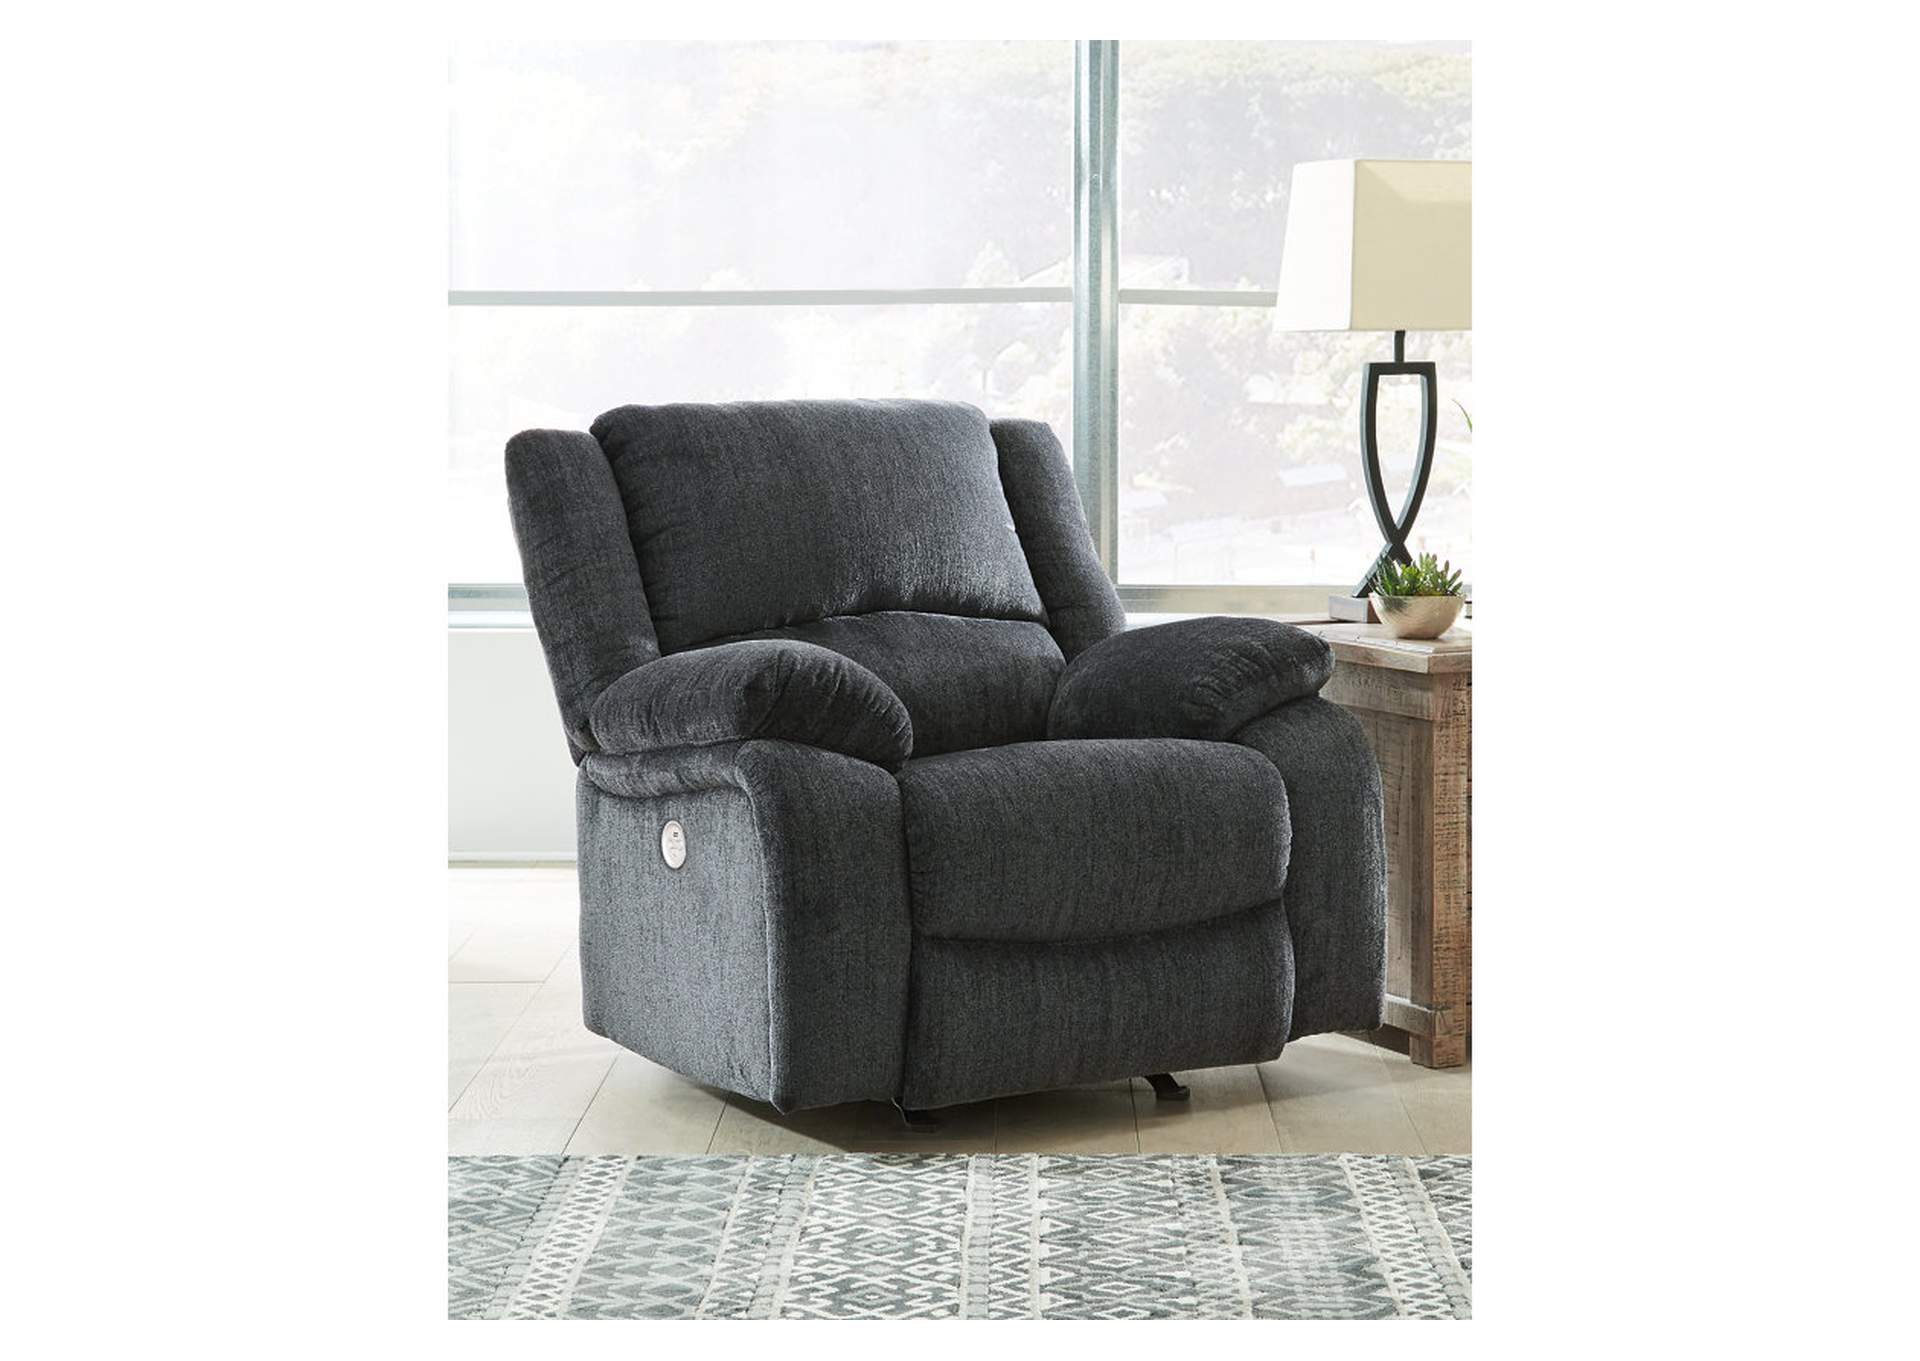 Draycoll Sofa, Loveseat and Recliner,Signature Design By Ashley